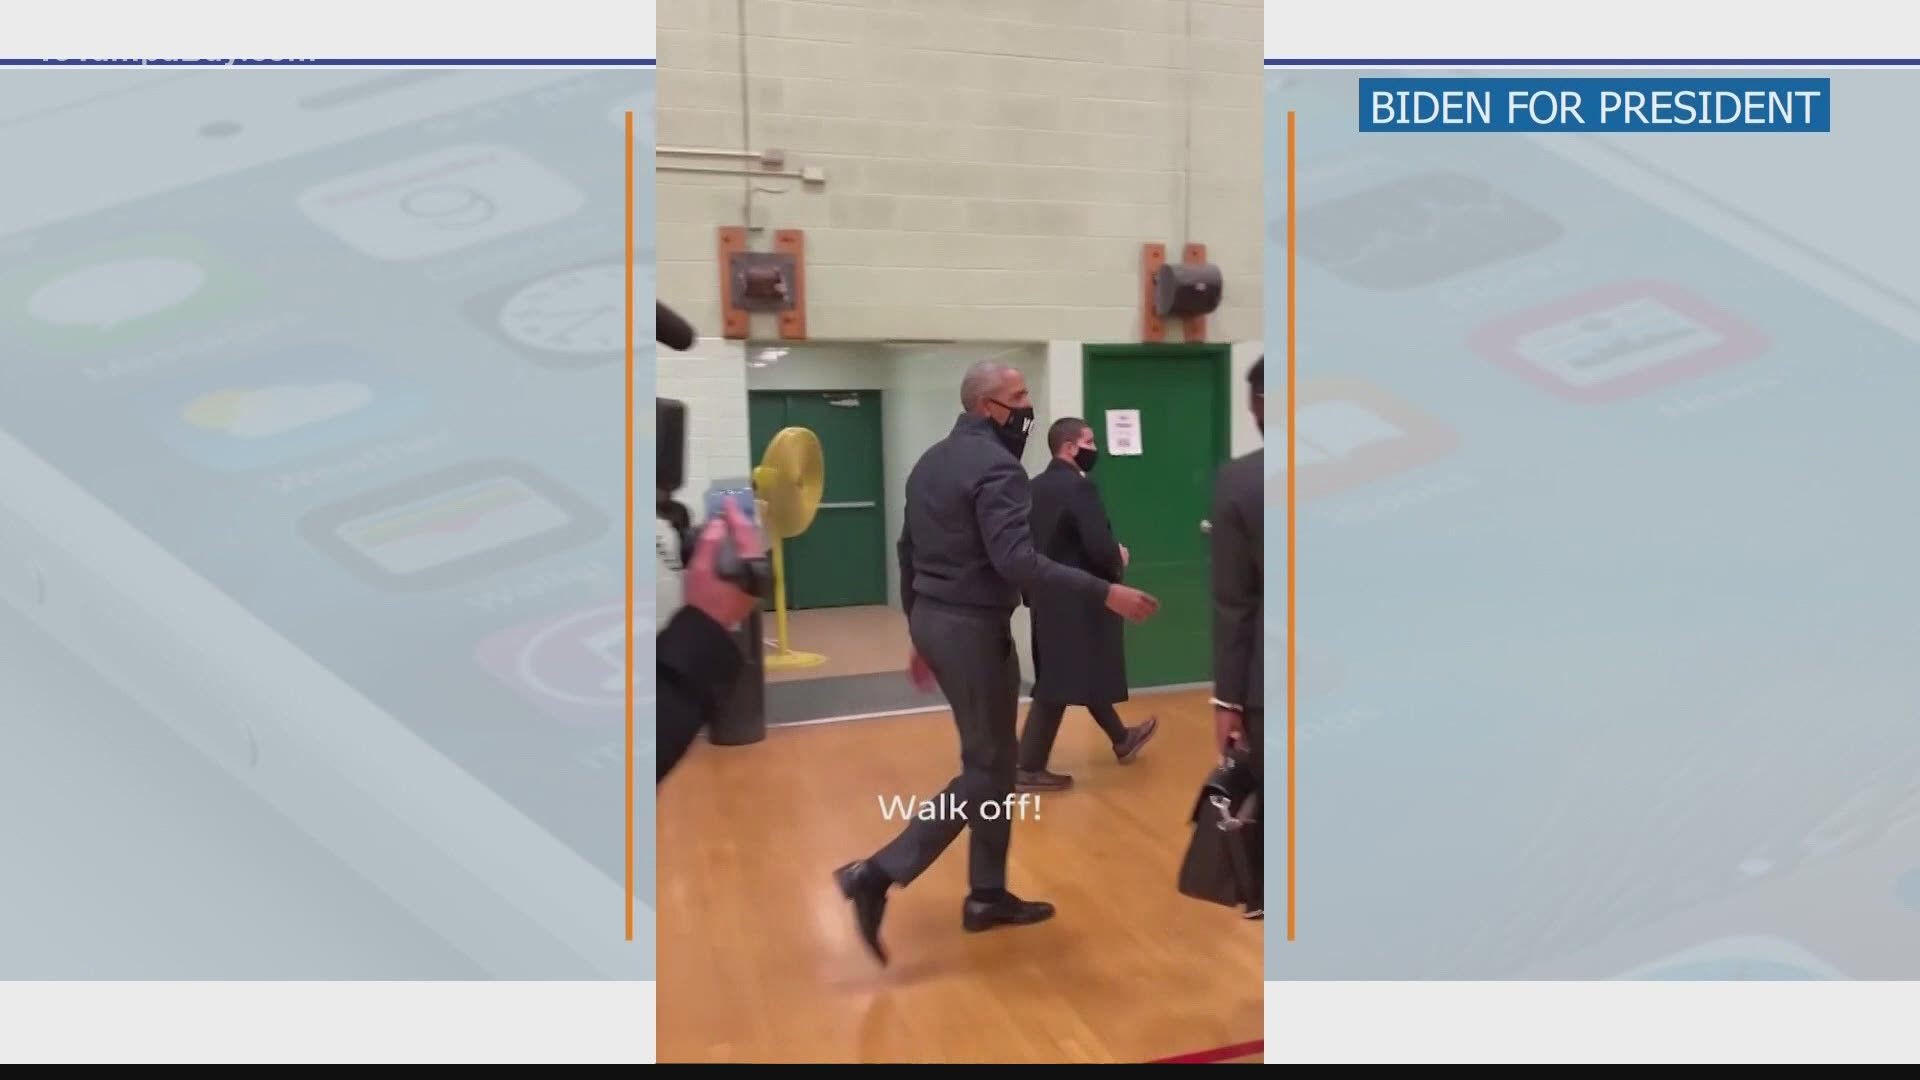 The former president showed off his skills on the court while on the campaign trail with Democratic presidential nominee and former VP Joe Biden.